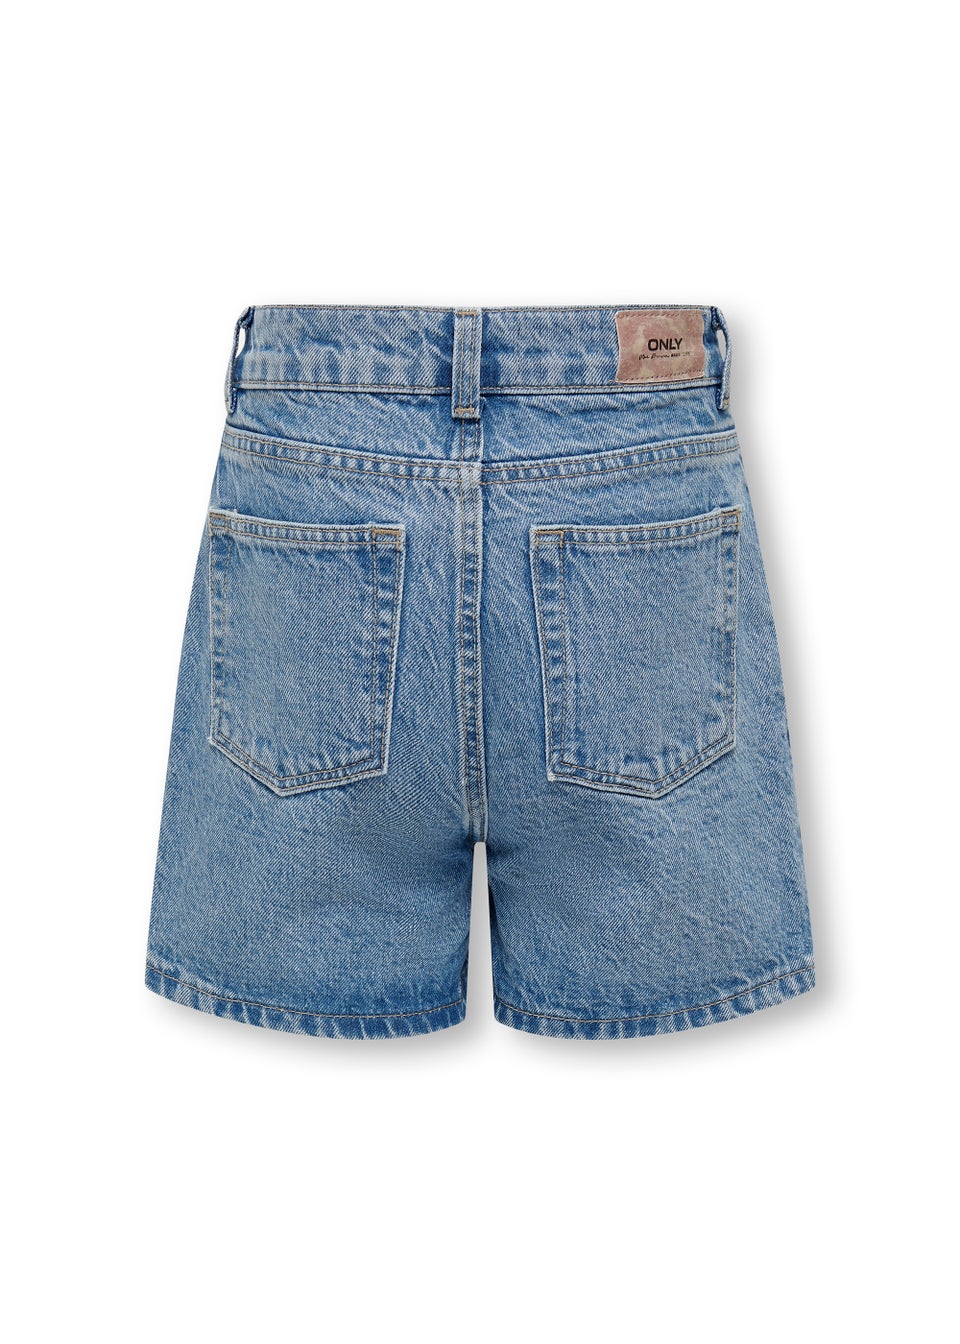 ONLY Kids Mid Wash Embroidered Denim Shorts (6-14yrs)